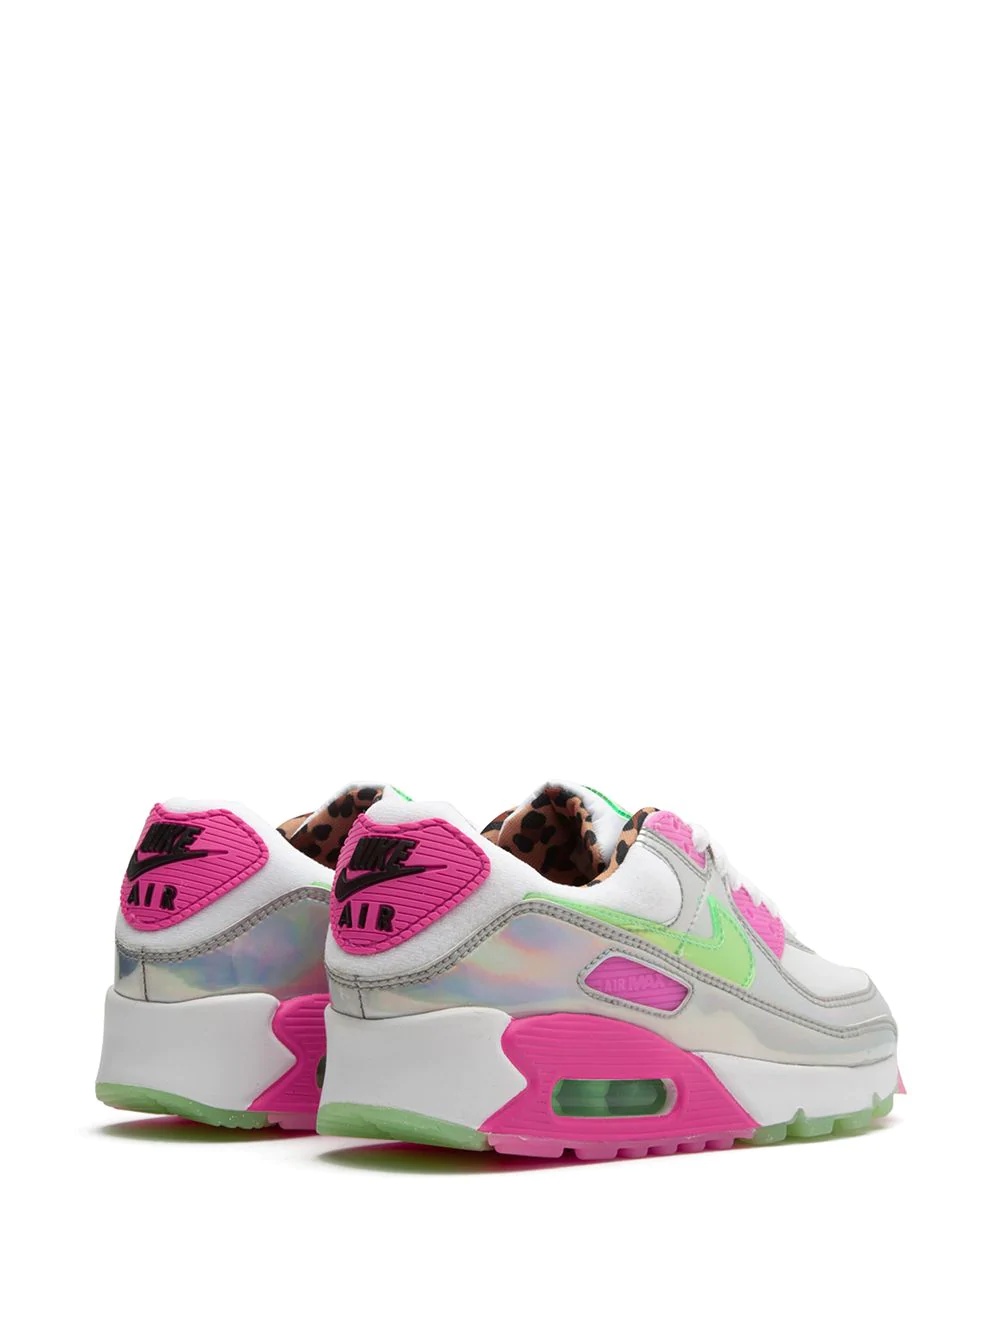 Air Max 90 LX "Iridescent Leopard" sneakers - 3